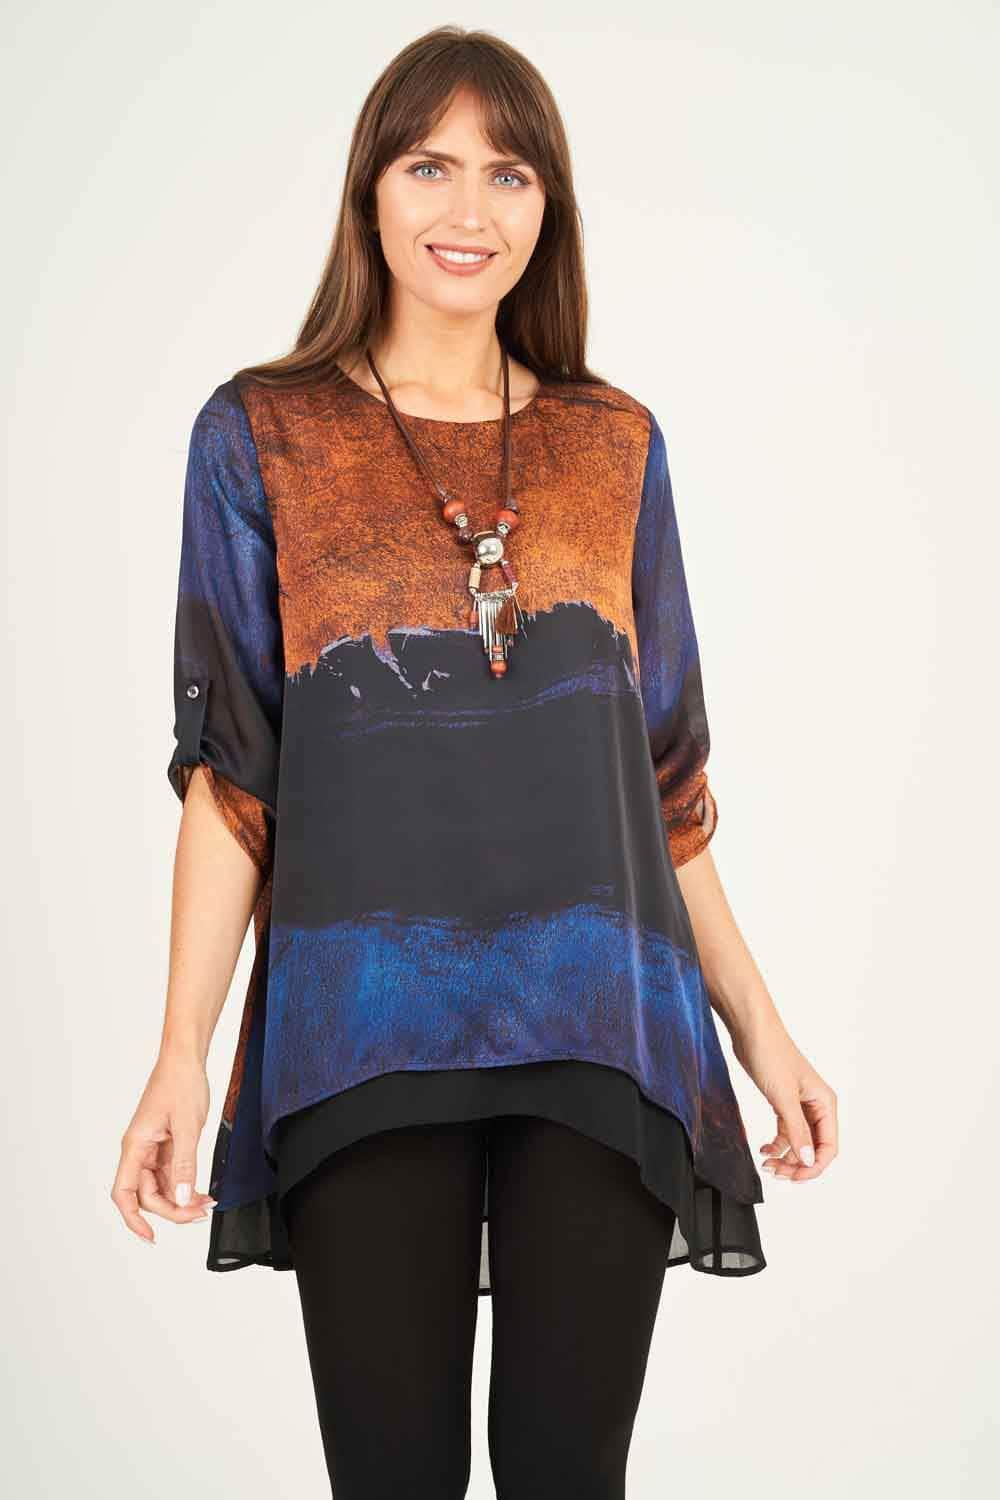 Saloos Silk-Look Tie-Dye Elliptical Tunic Top with Necklace